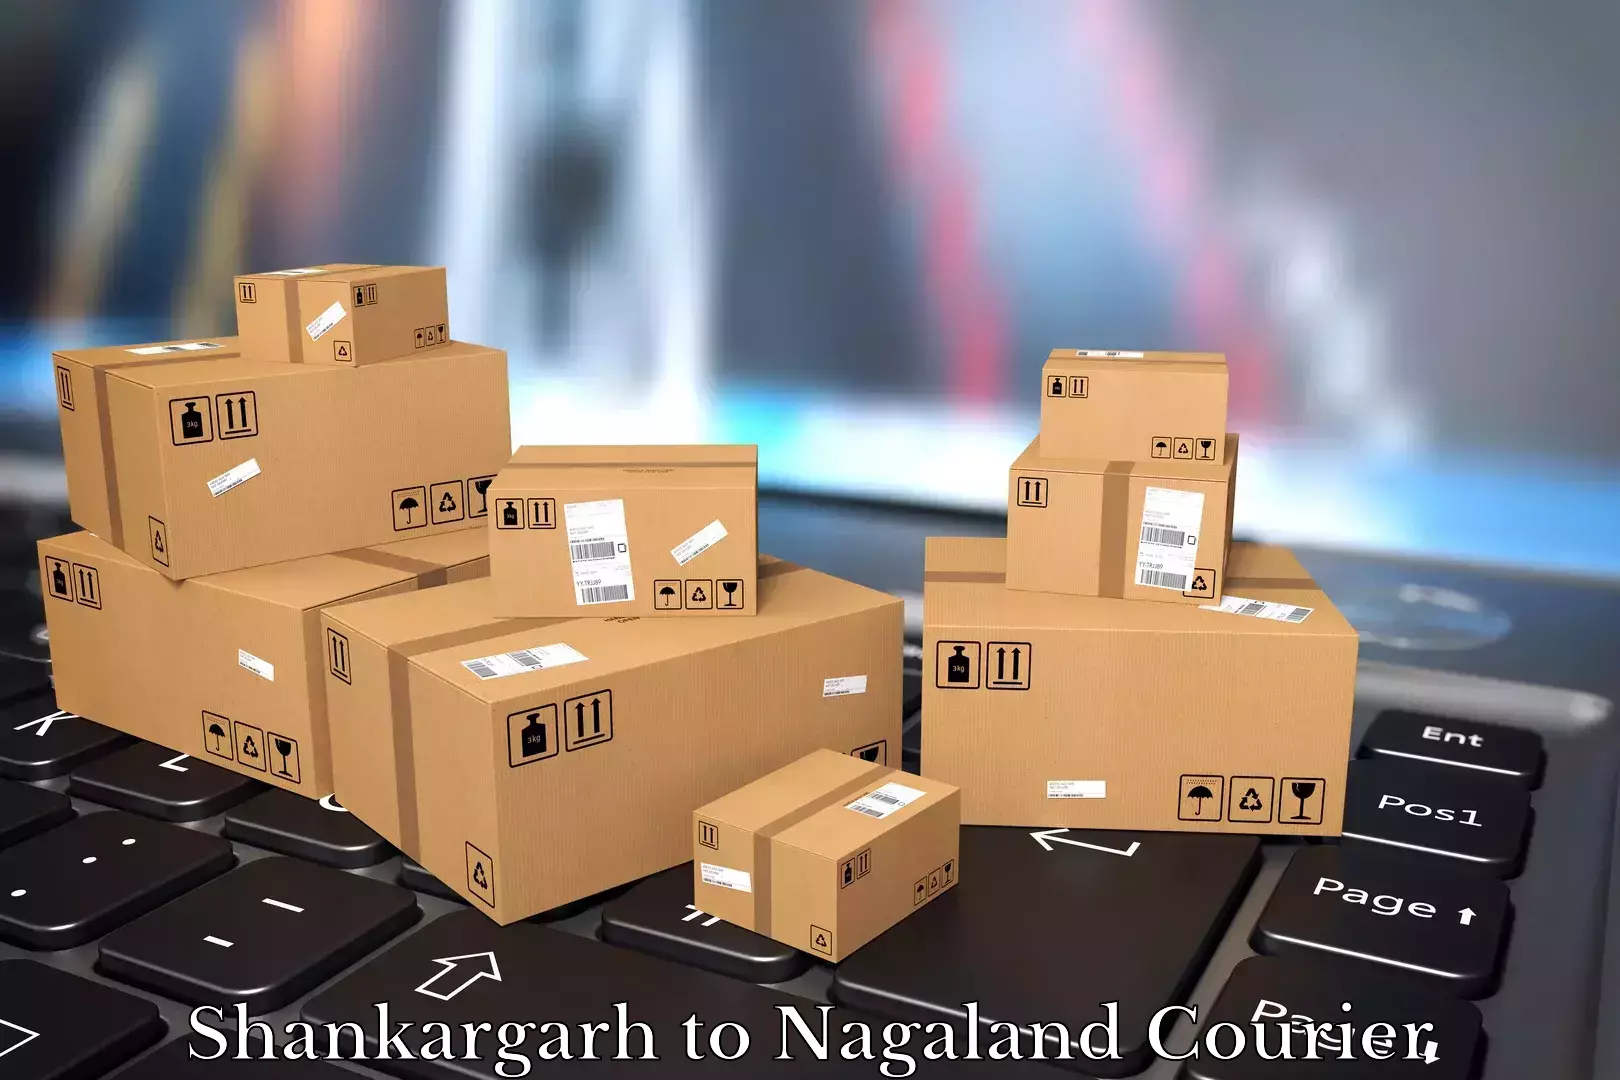 Furniture relocation experts Shankargarh to Nagaland